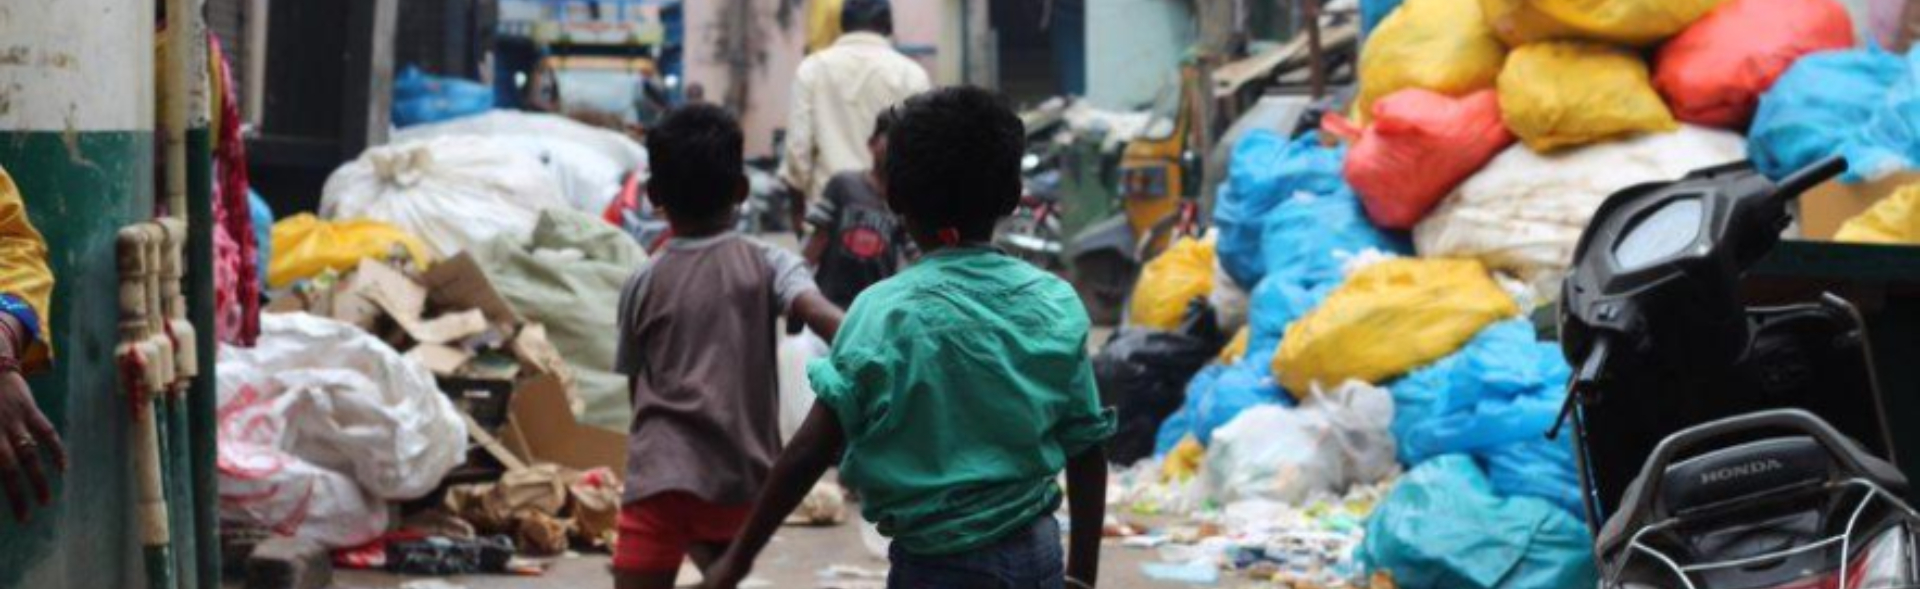 Impact of Poverty on Children in India